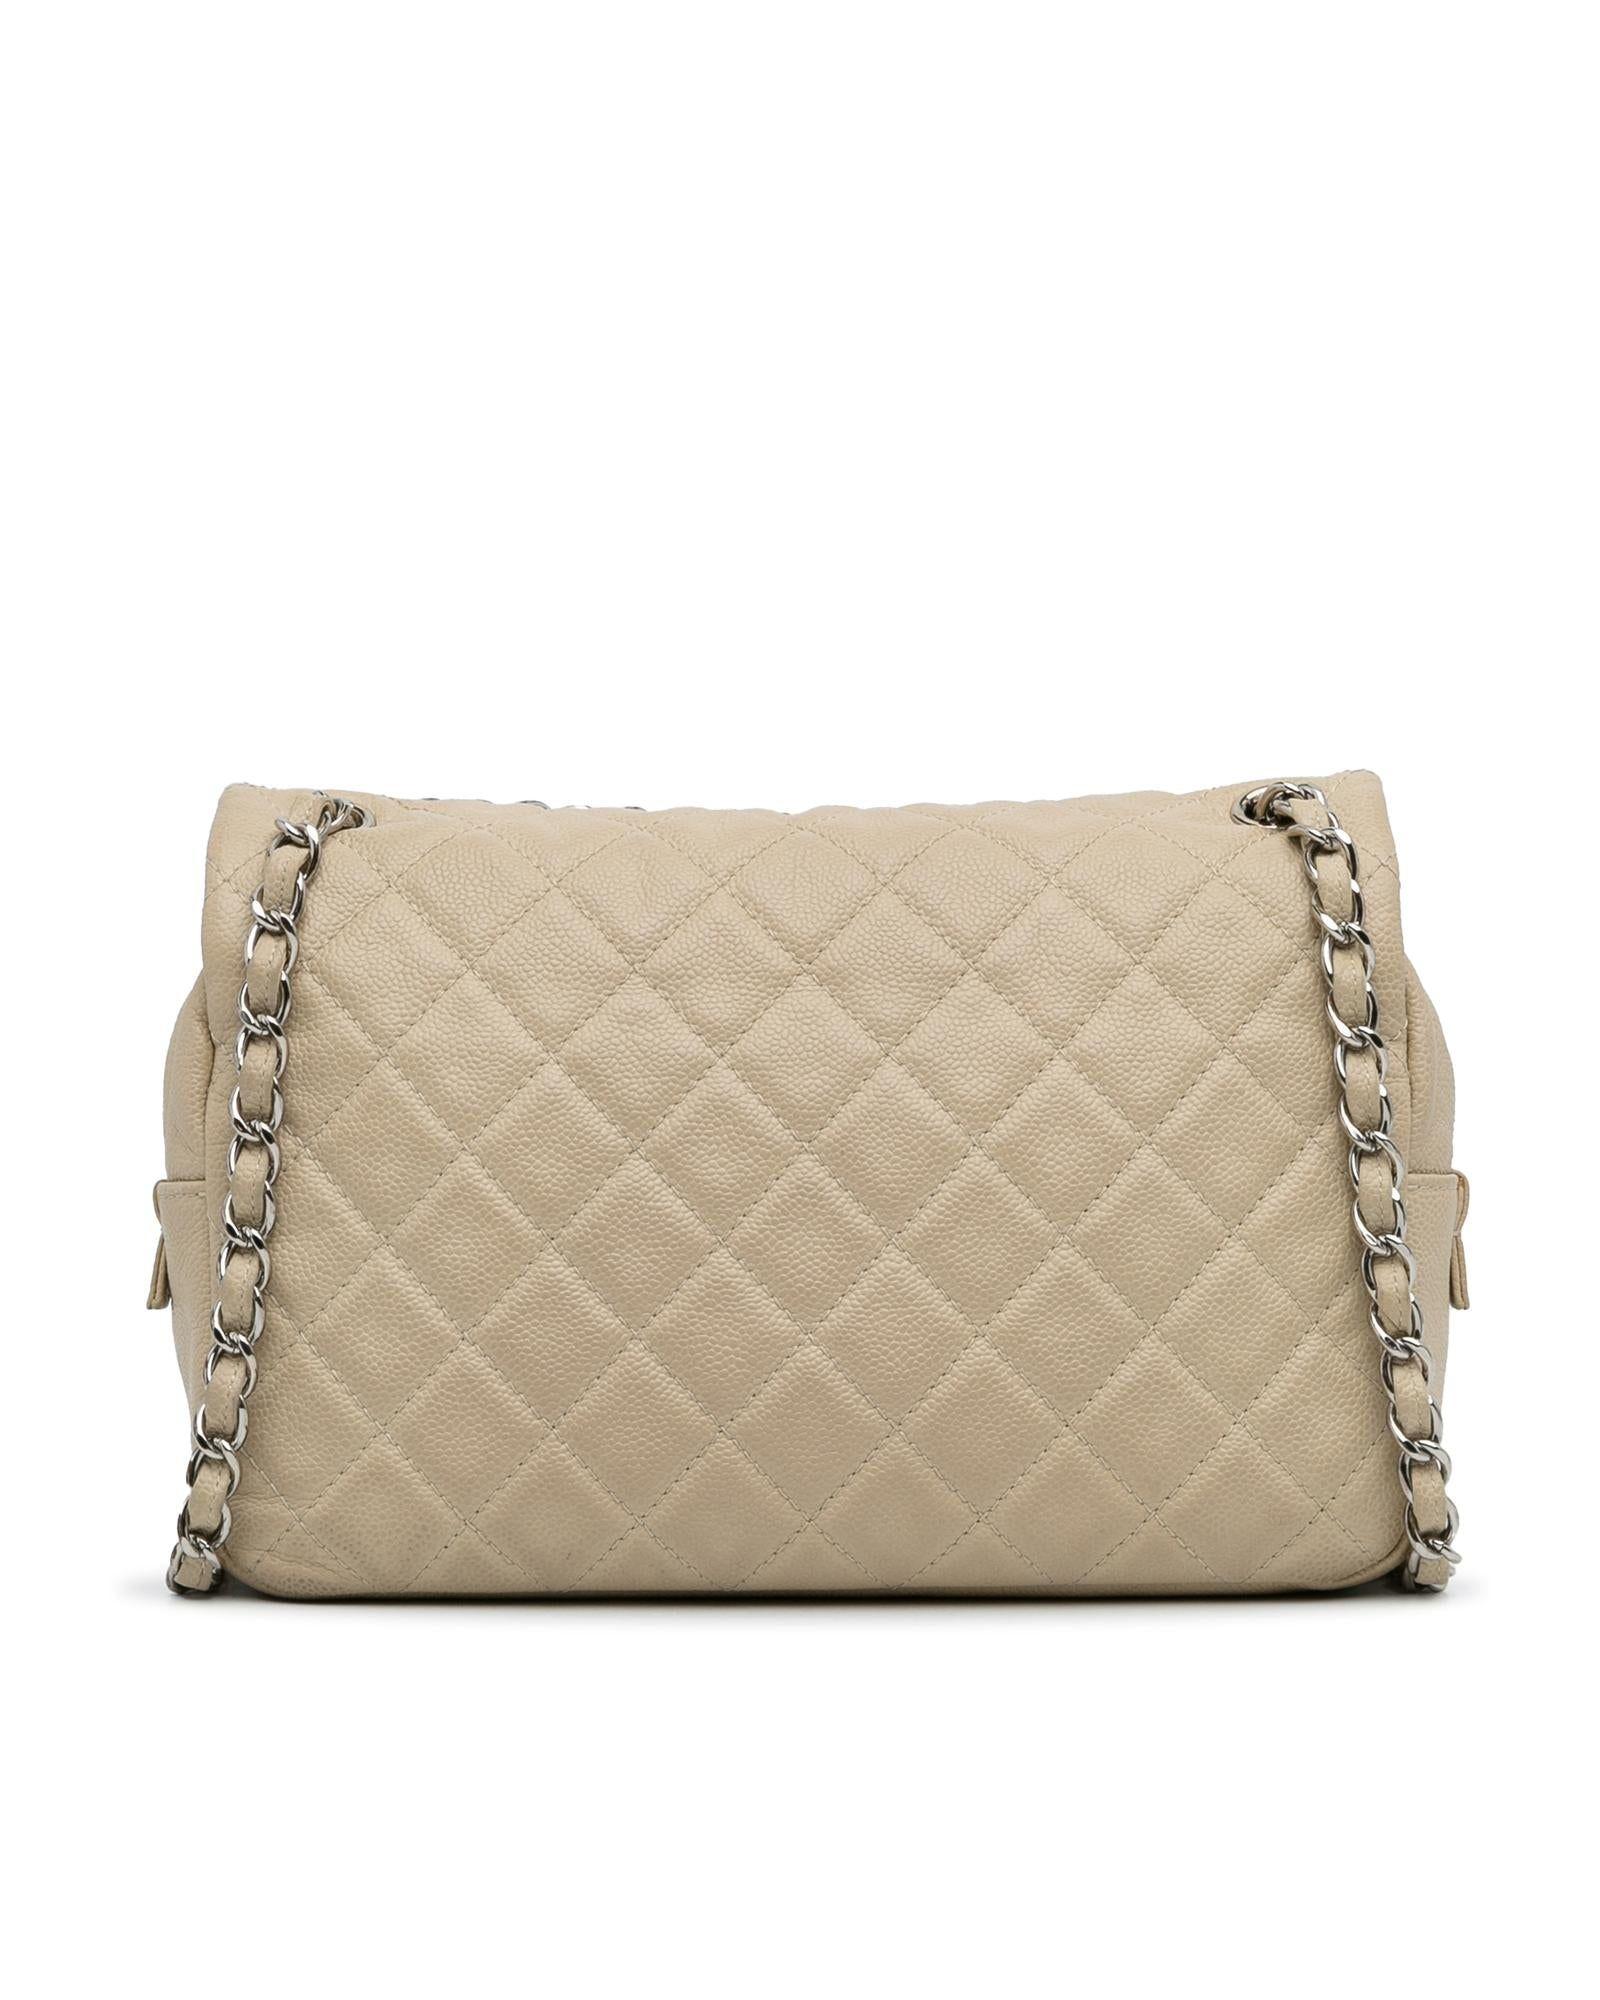 Chanel Quilted Leather Chain Shoulder Bag in Natural